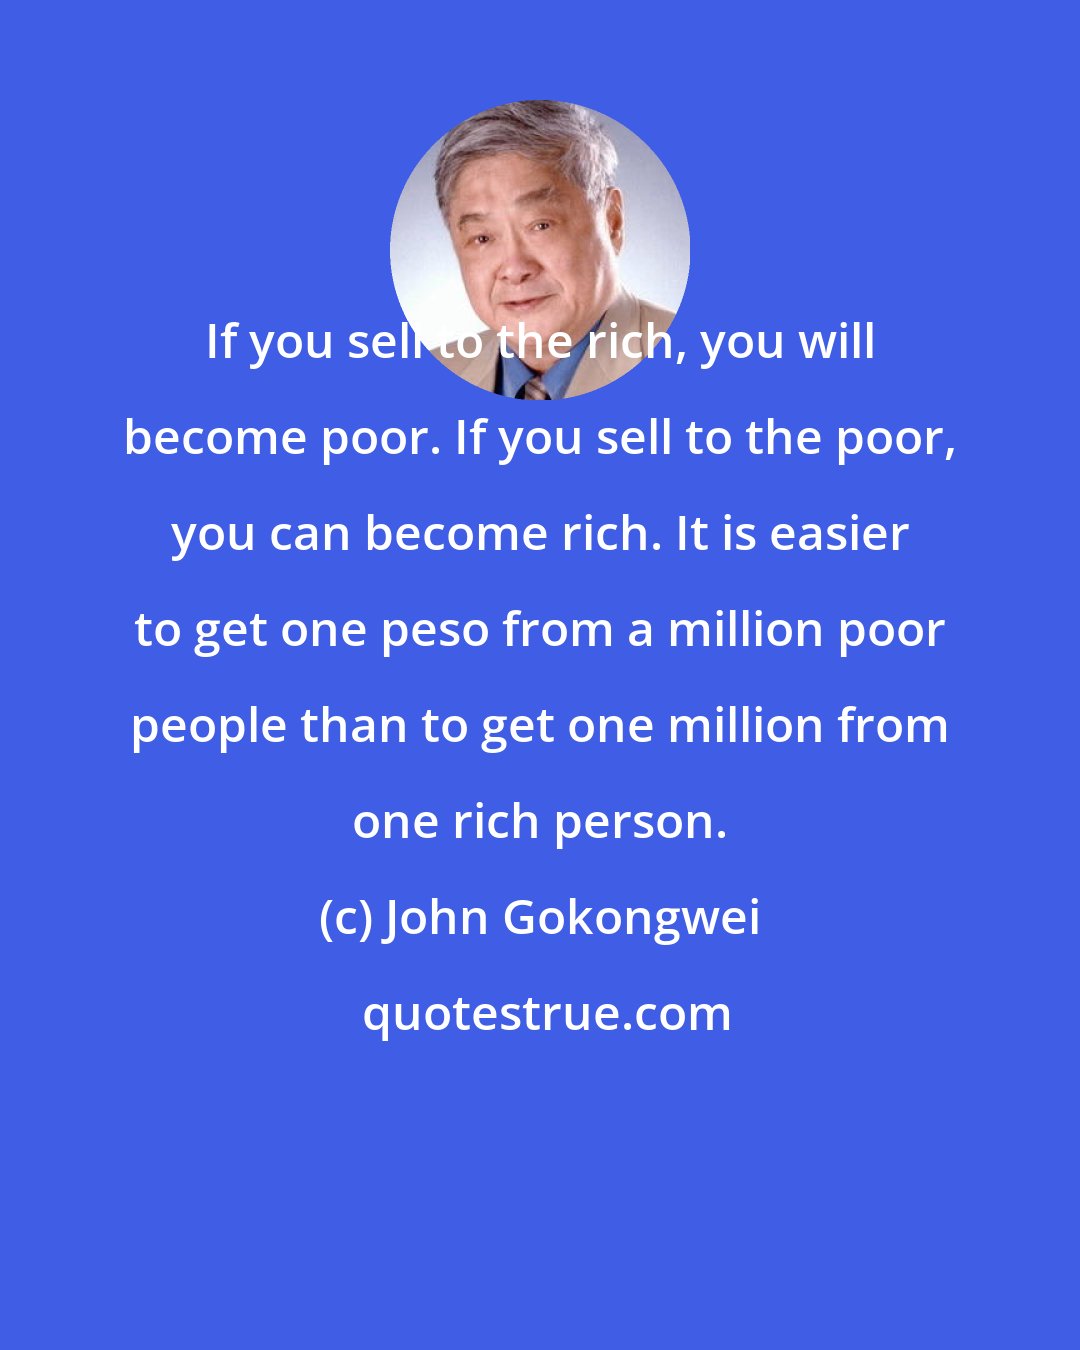 John Gokongwei: If you sell to the rich, you will become poor. If you sell to the poor, you can become rich. It is easier to get one peso from a million poor people than to get one million from one rich person.